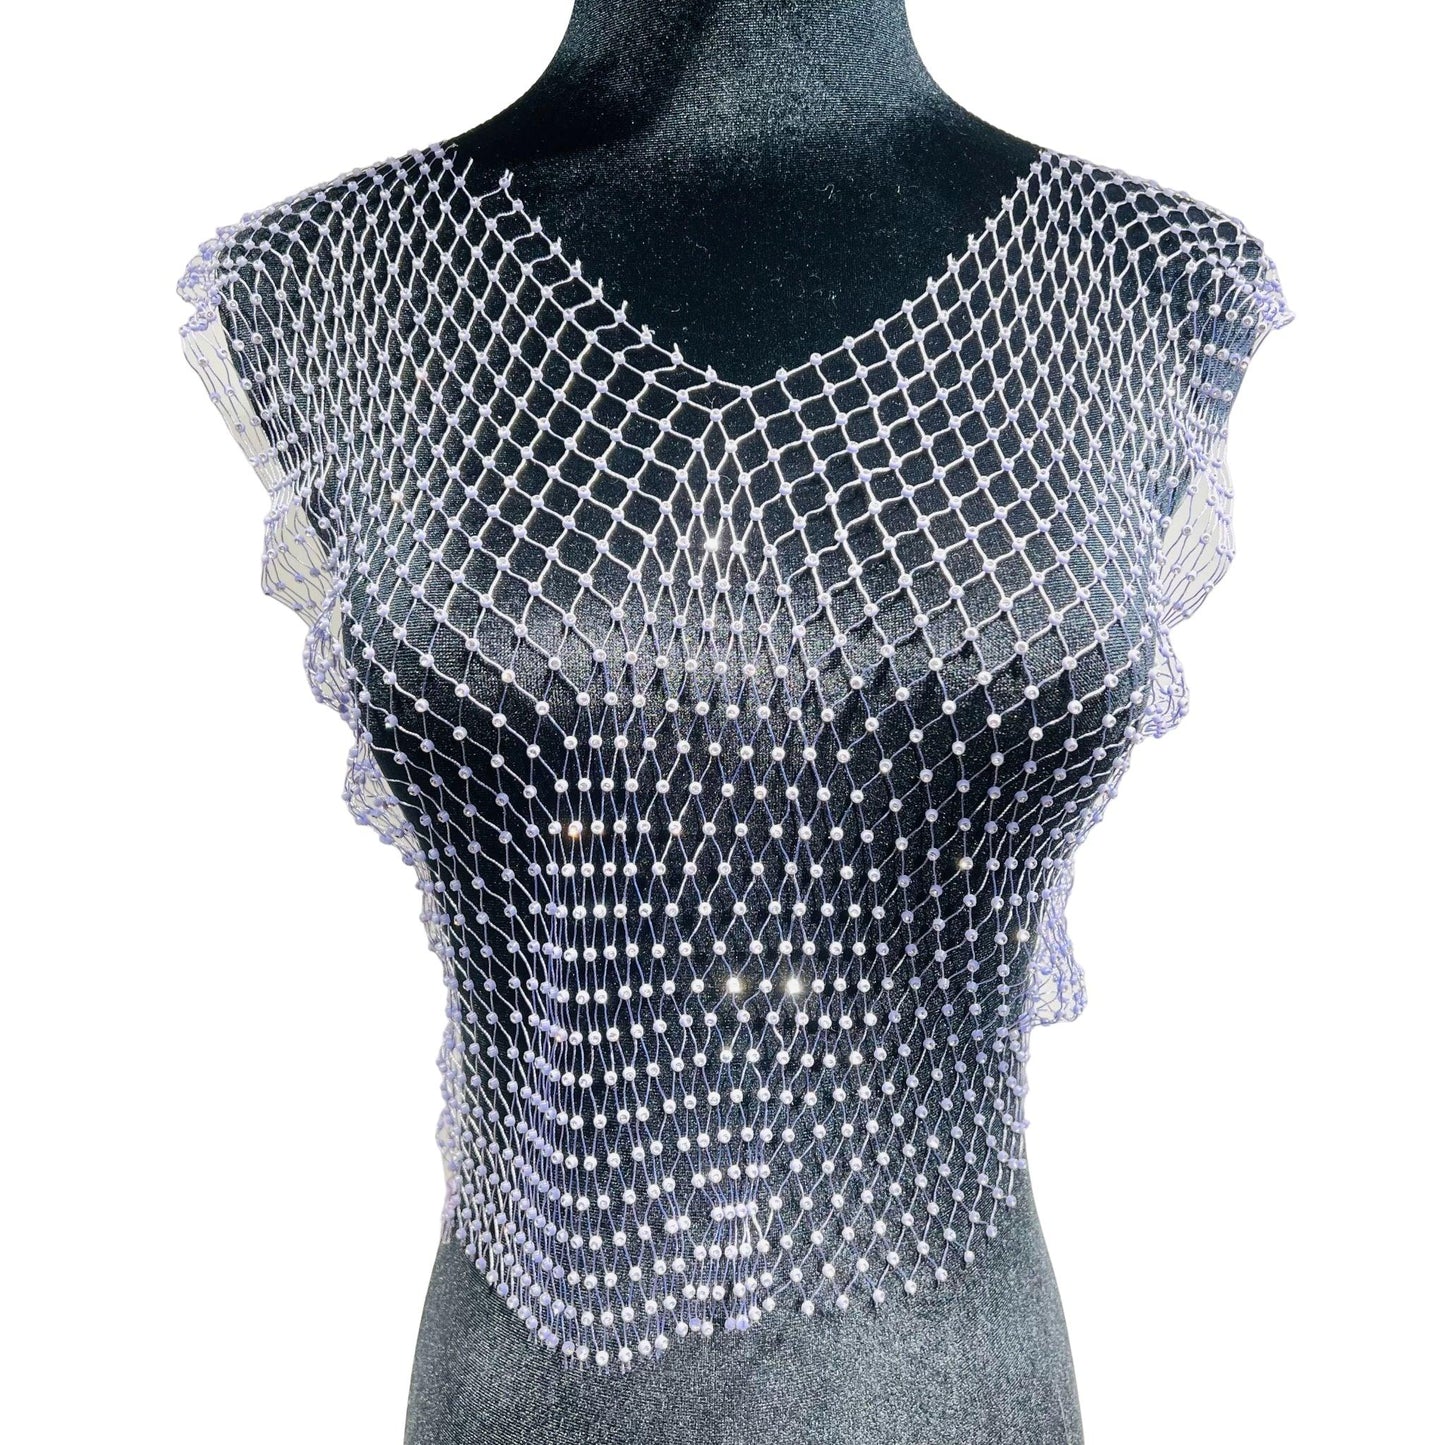 Rhinestone Studded Mesh Crop Top - Your Shiny Clothes